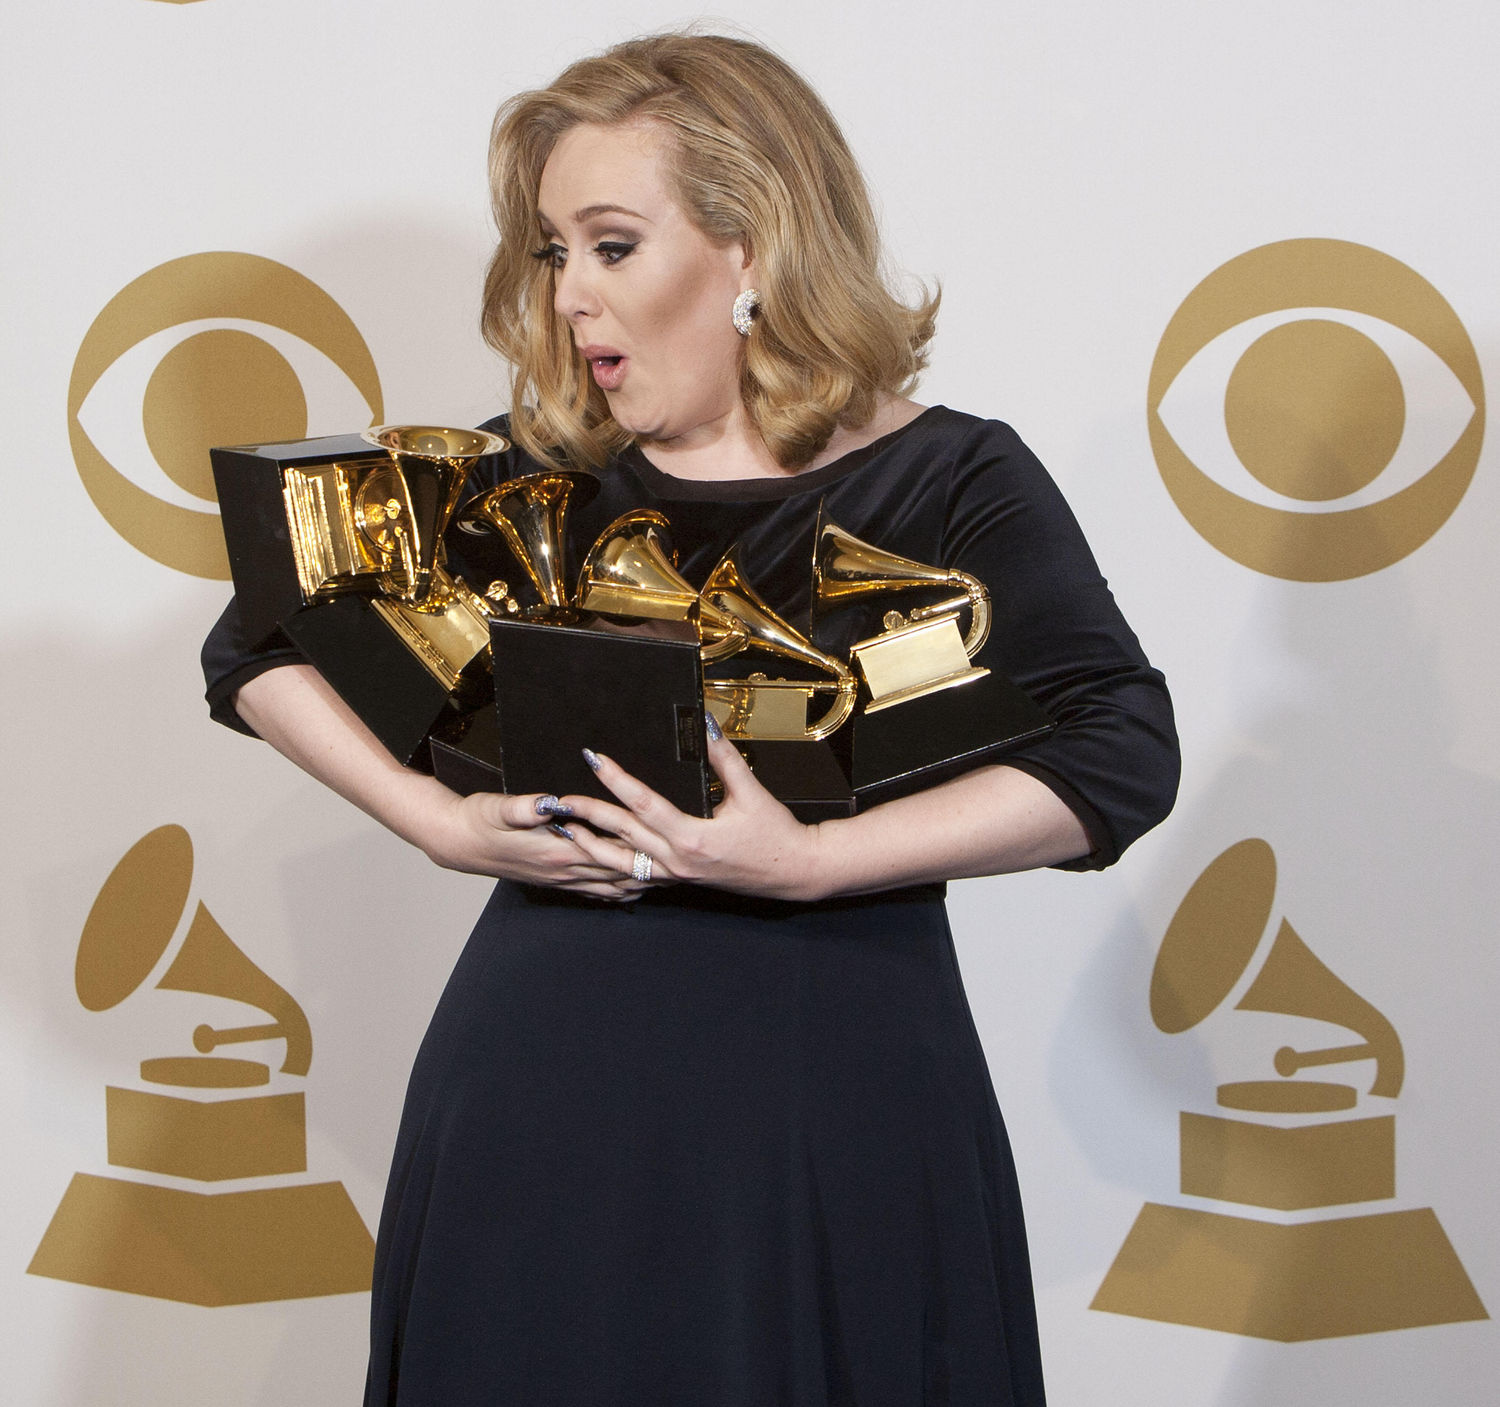 Adele’s Subsequent Album Is Reportedly Coming ‘Soon’